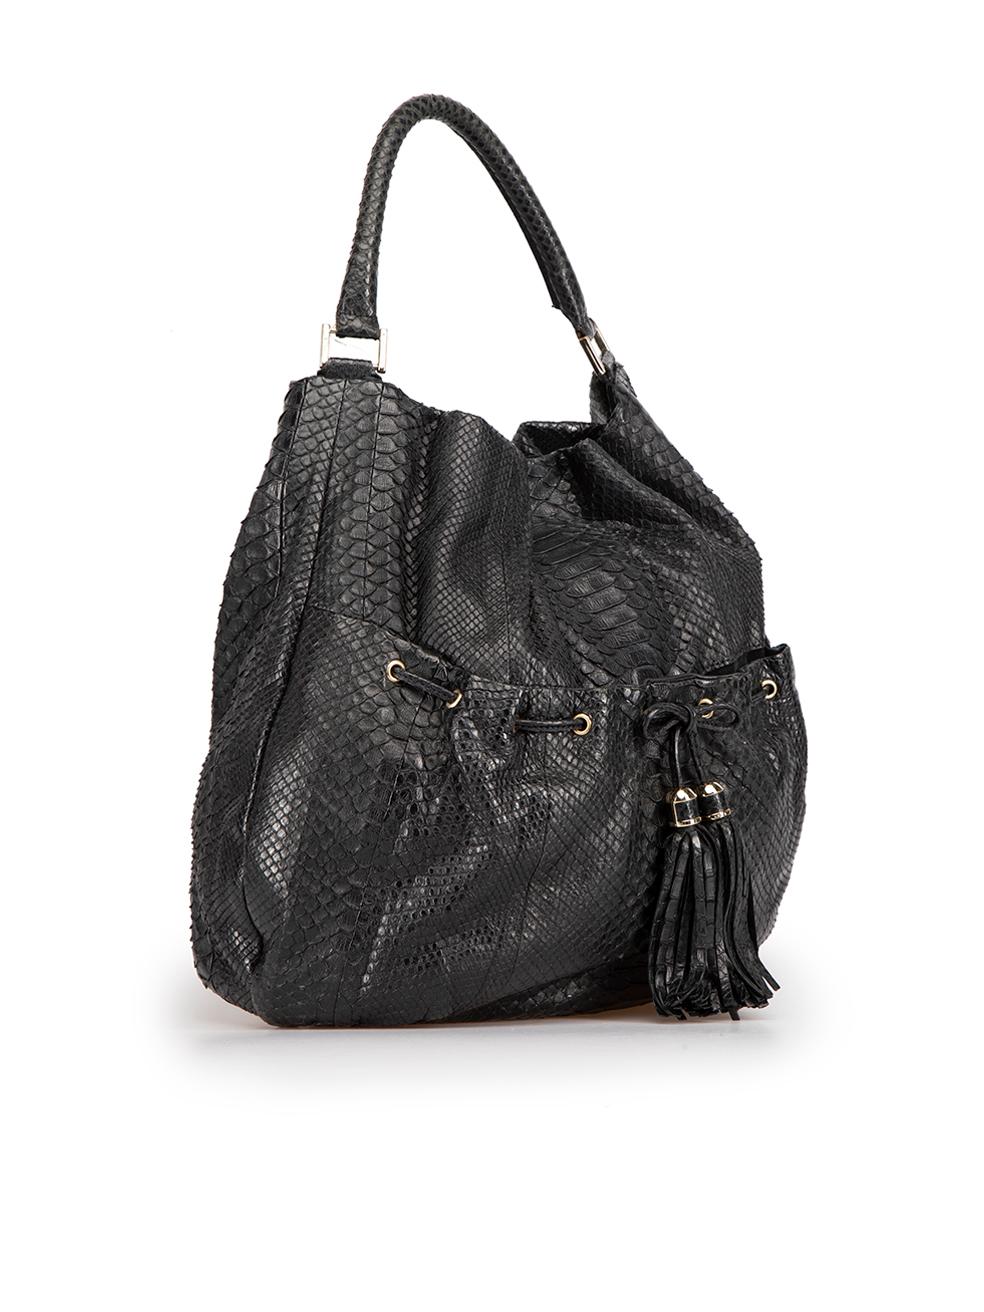 CONDITION is Very good. Minimal wear to bag is evident. Minimal wear to the edges of the bag with slight scuff marks. The lining also has discoloured marks on this used Anya Hindmarch designer resale item.
  
  Details
  Black
  Python leather
 